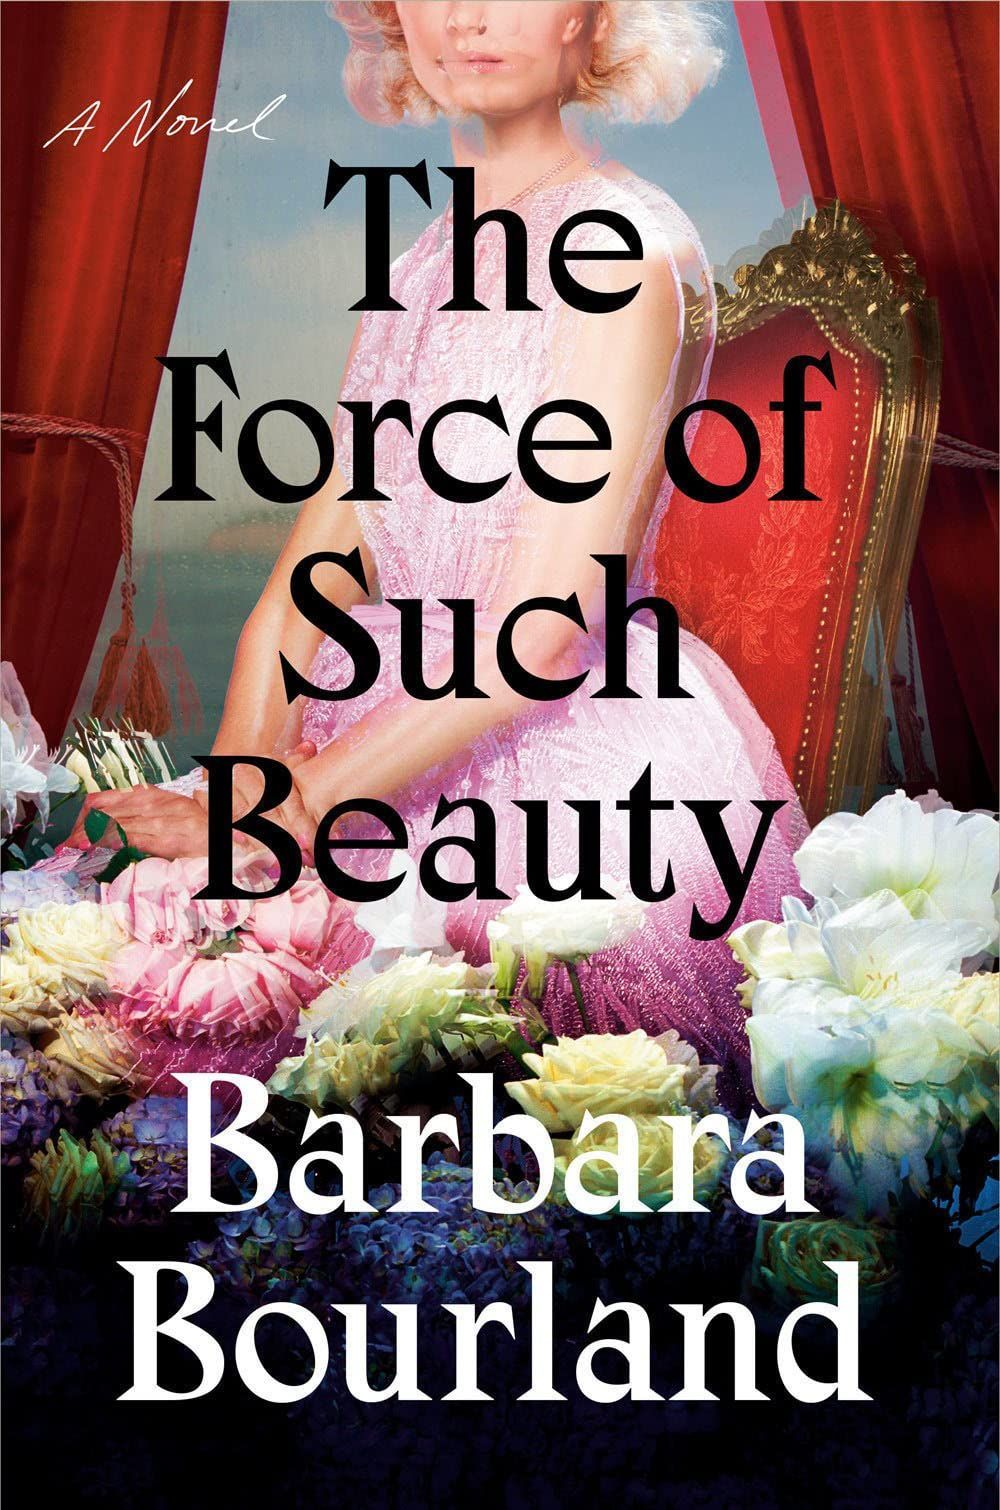 The Faustian Bargain of Princess Stories: A Conversation with Barbara Bourland